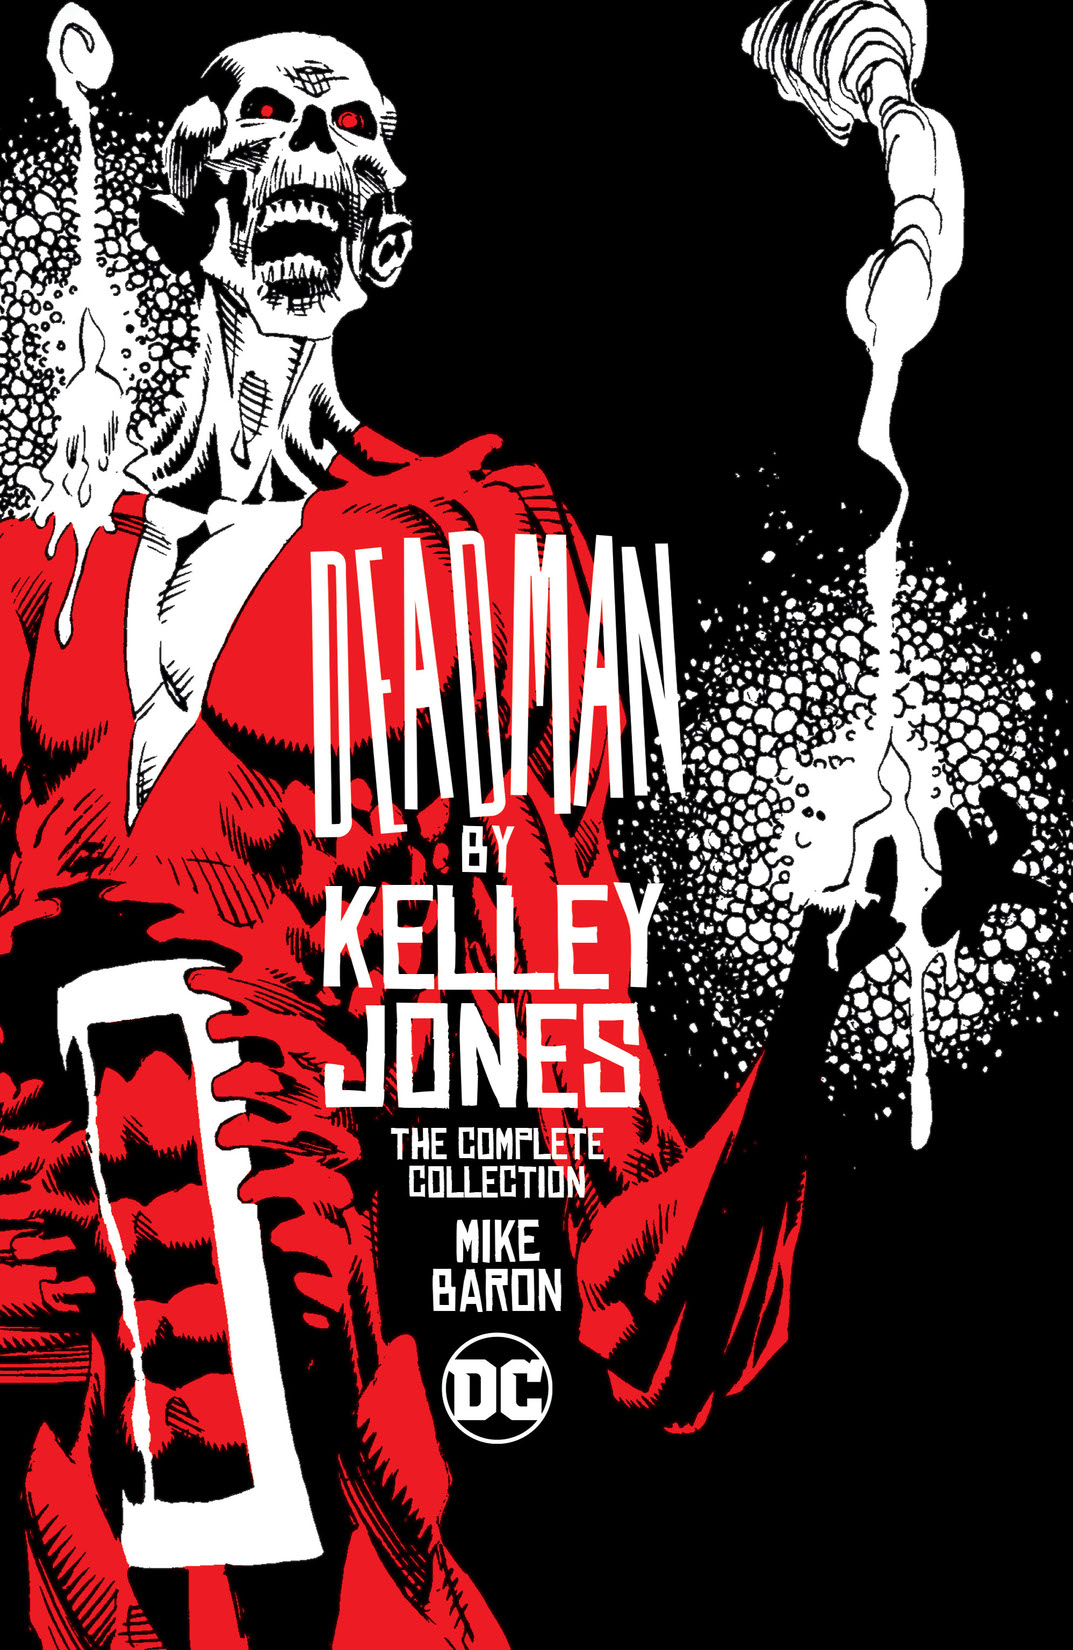 Deadman by Kelley Jones: The Complete Collection preview images